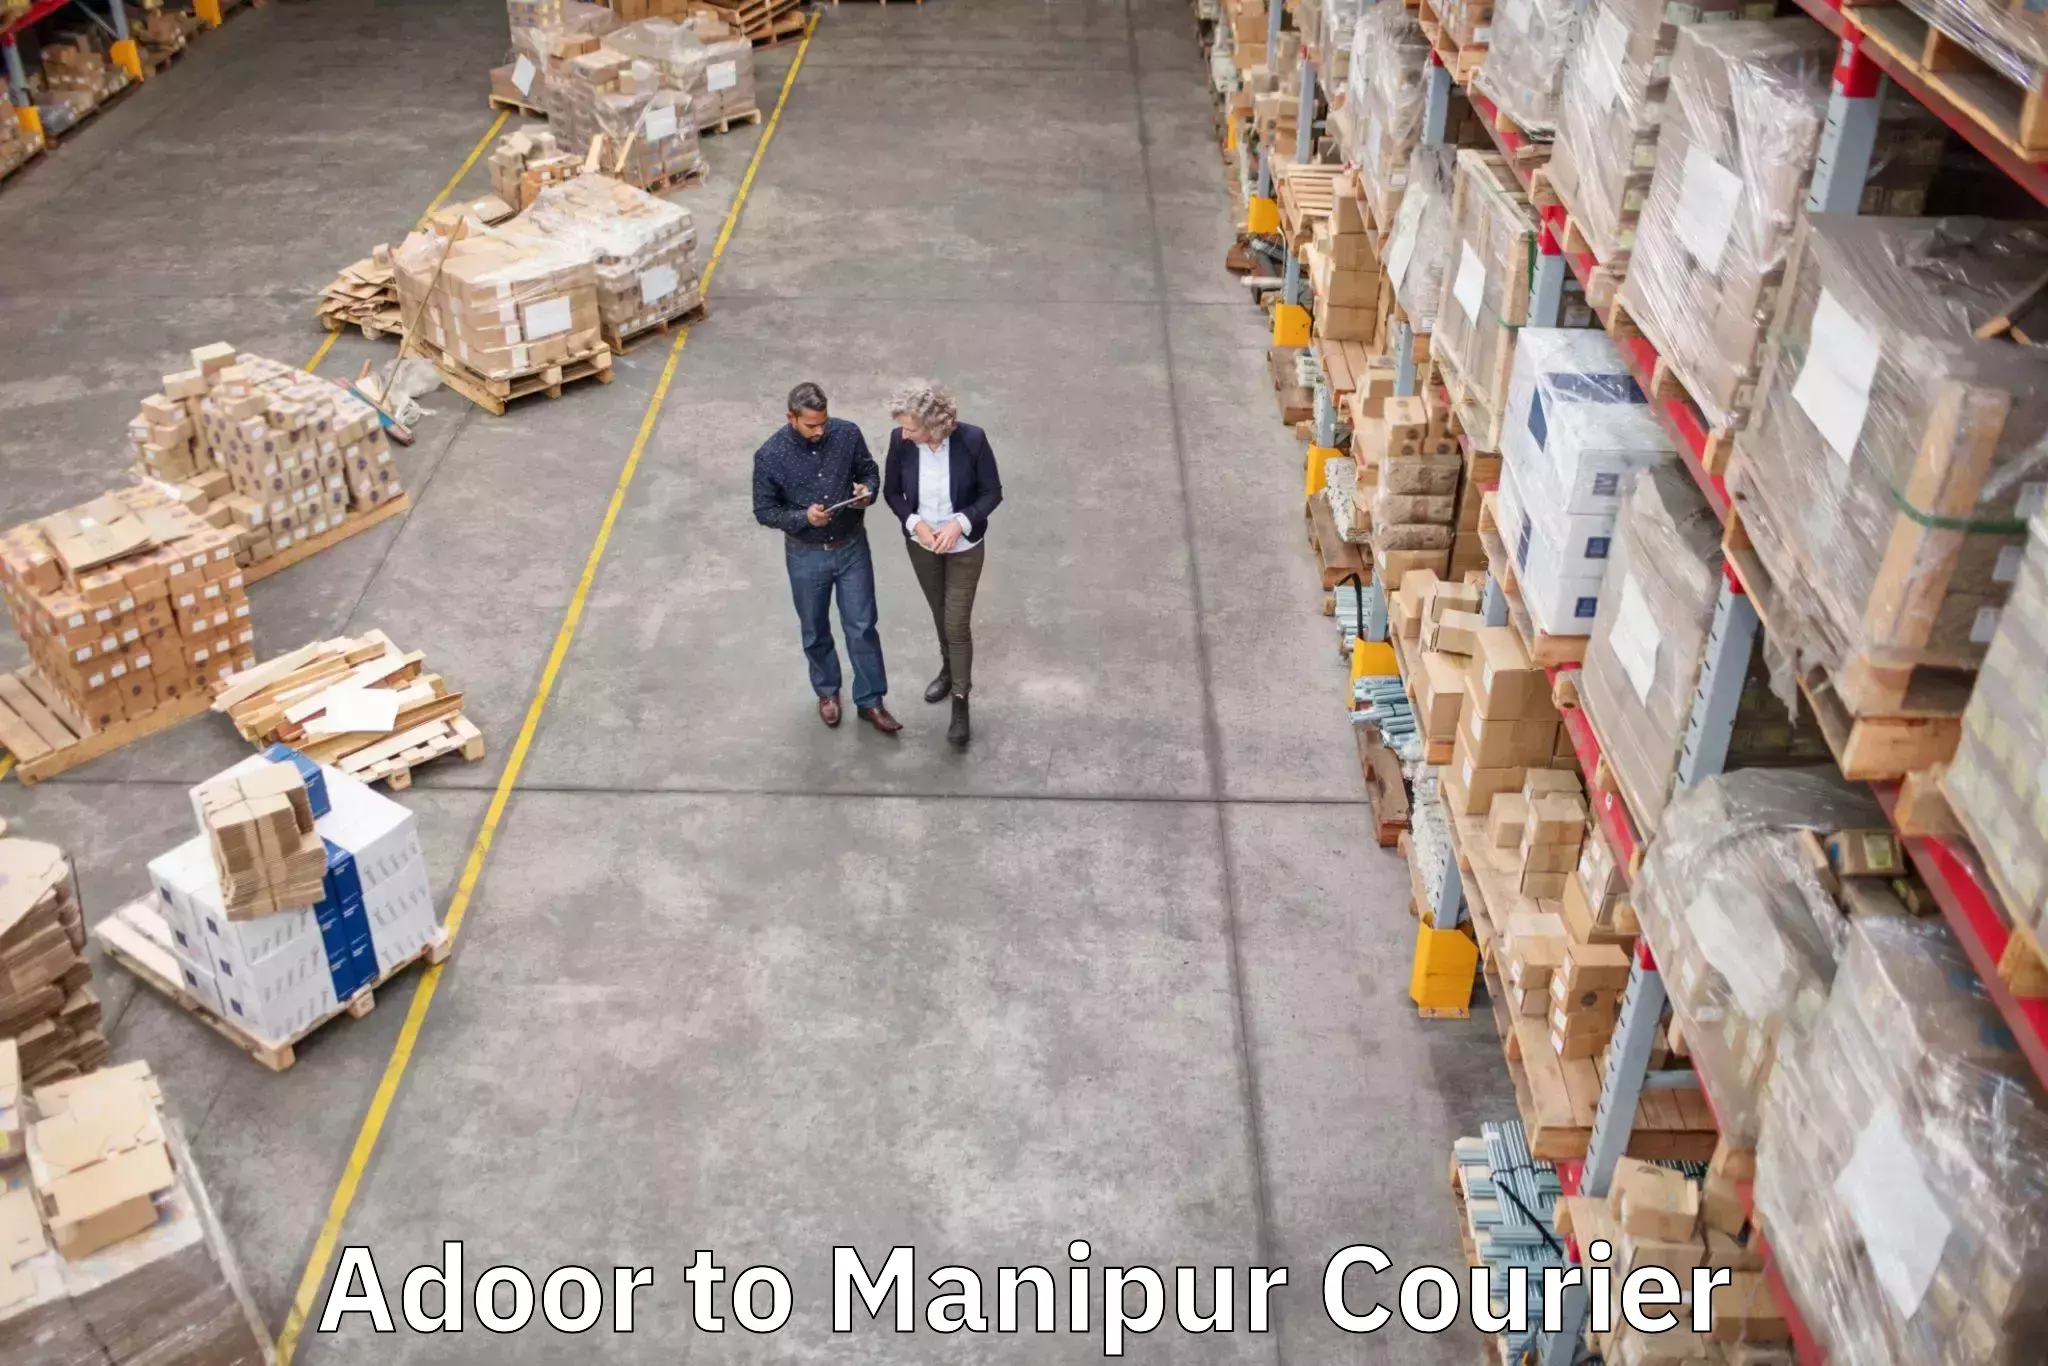 Luggage transport company Adoor to Manipur